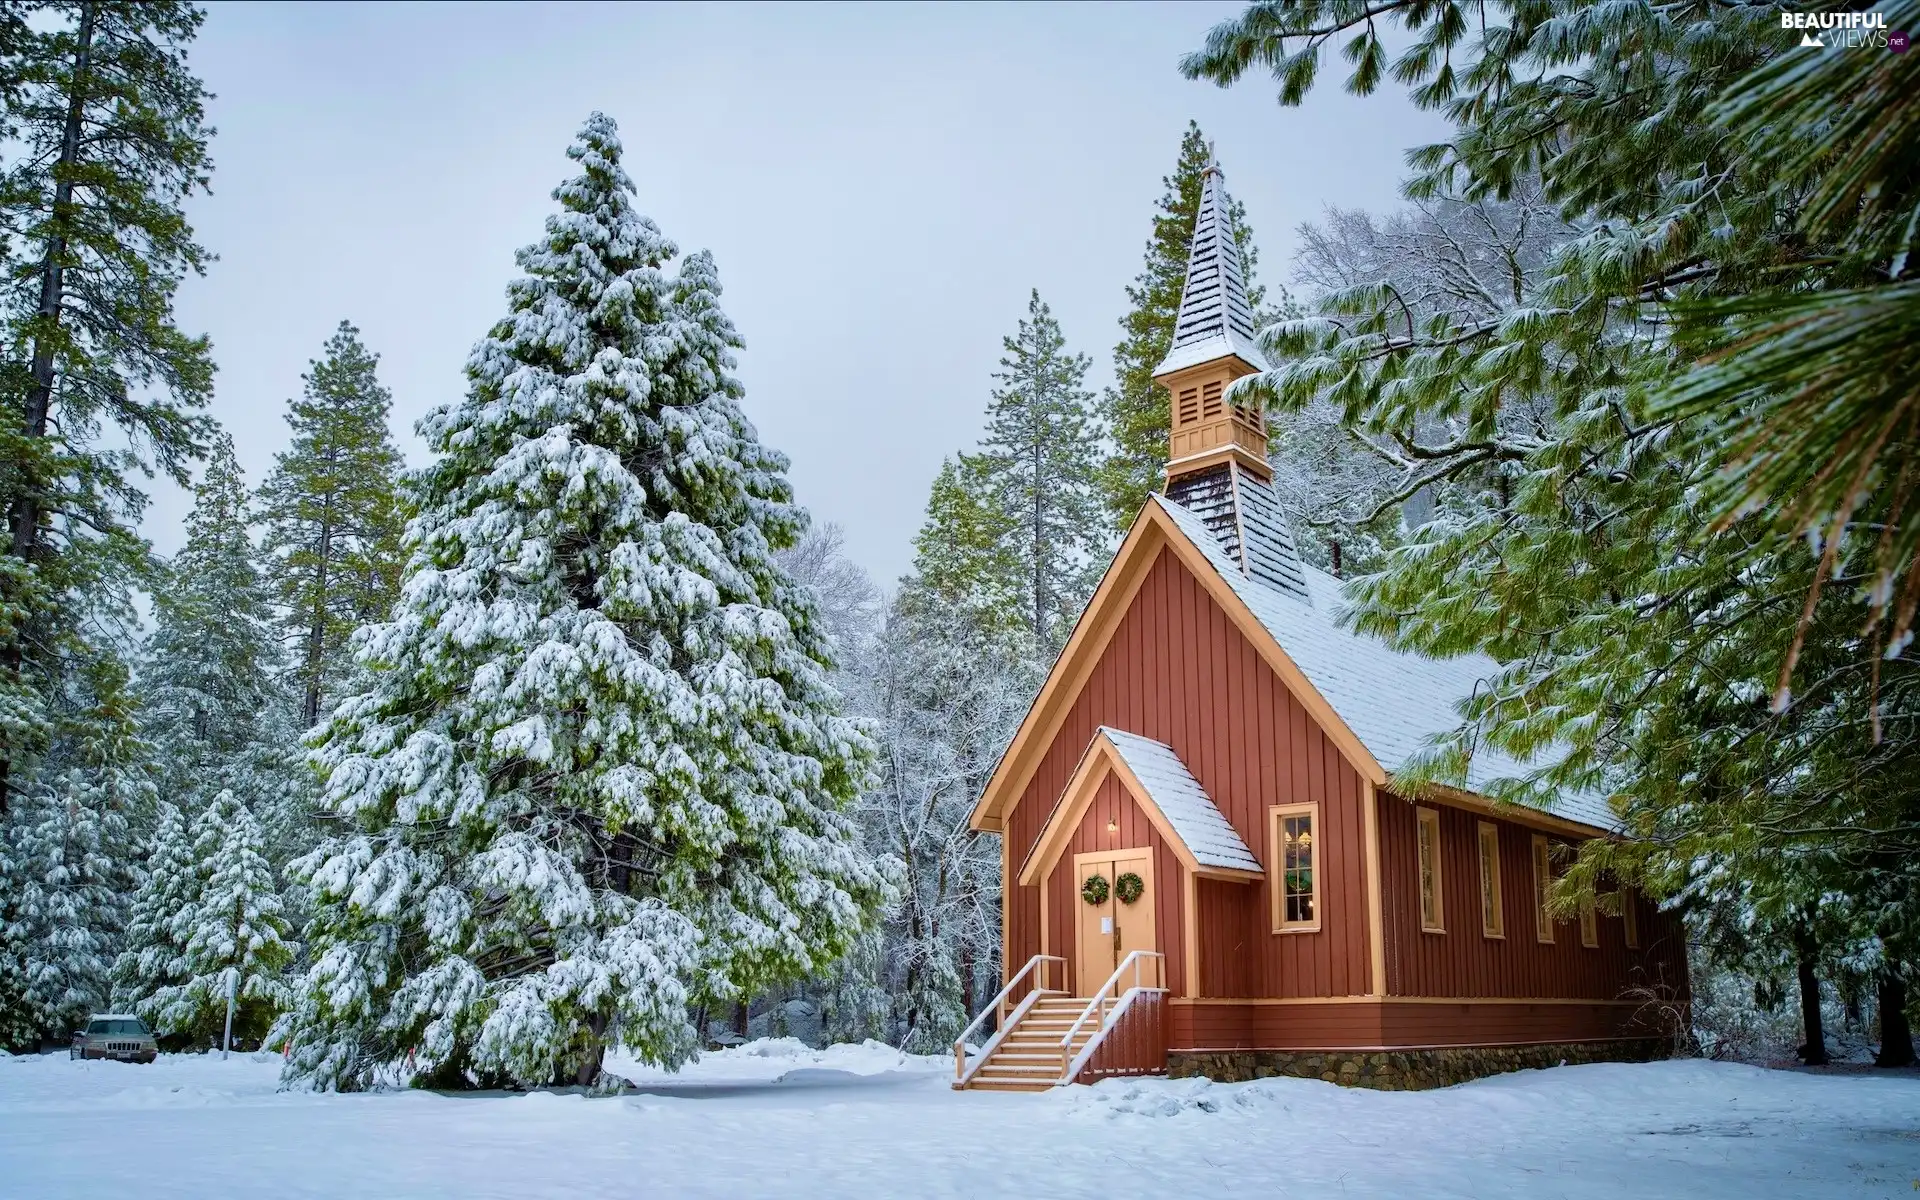 Yosemite National Park, church, winter, trees, Snowy, California, The United States, viewes